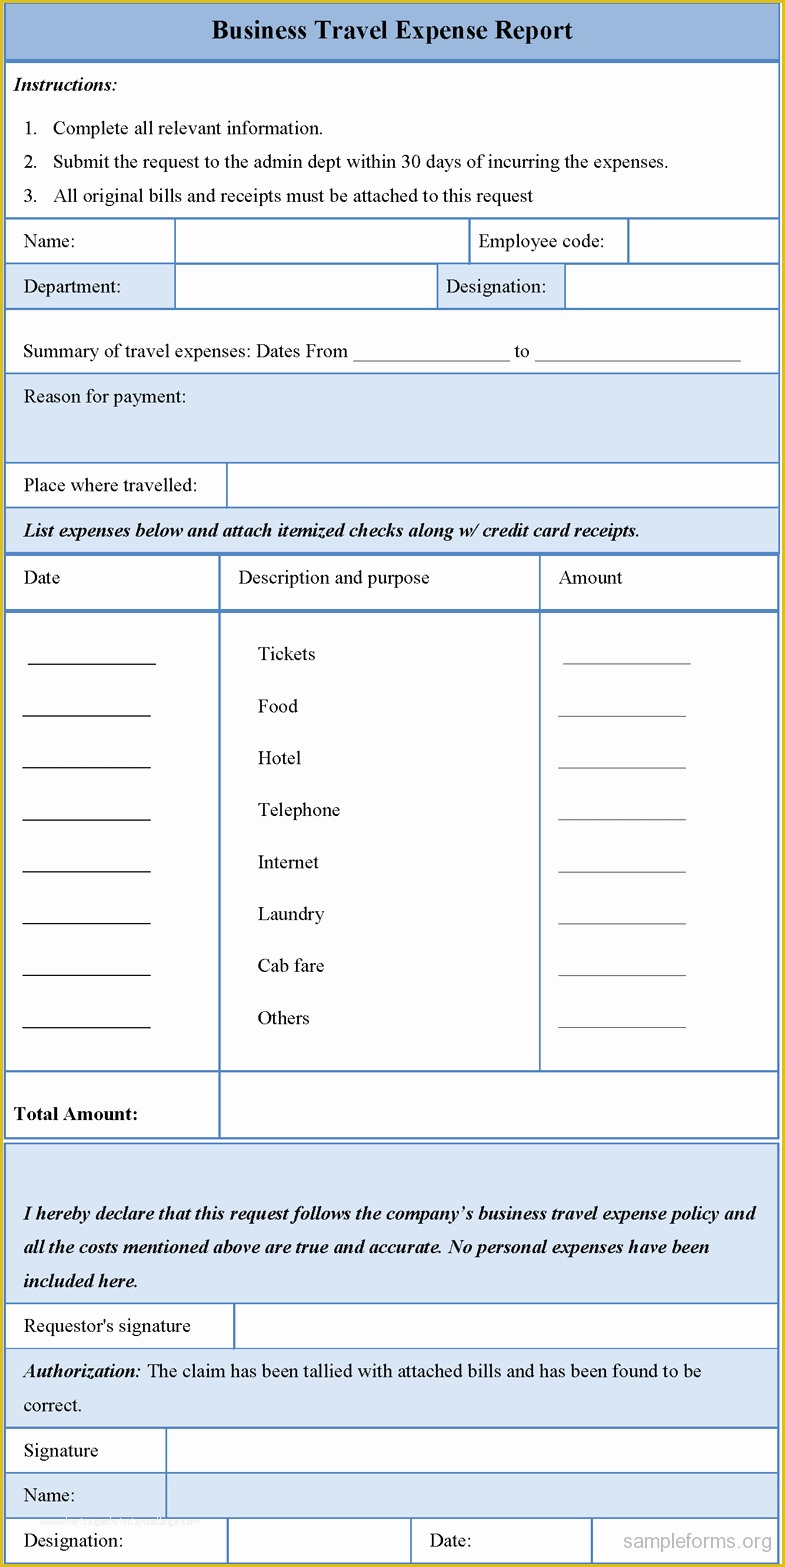 Free Business Trip Report Template Of Business Travel Expense Report form Sample forms